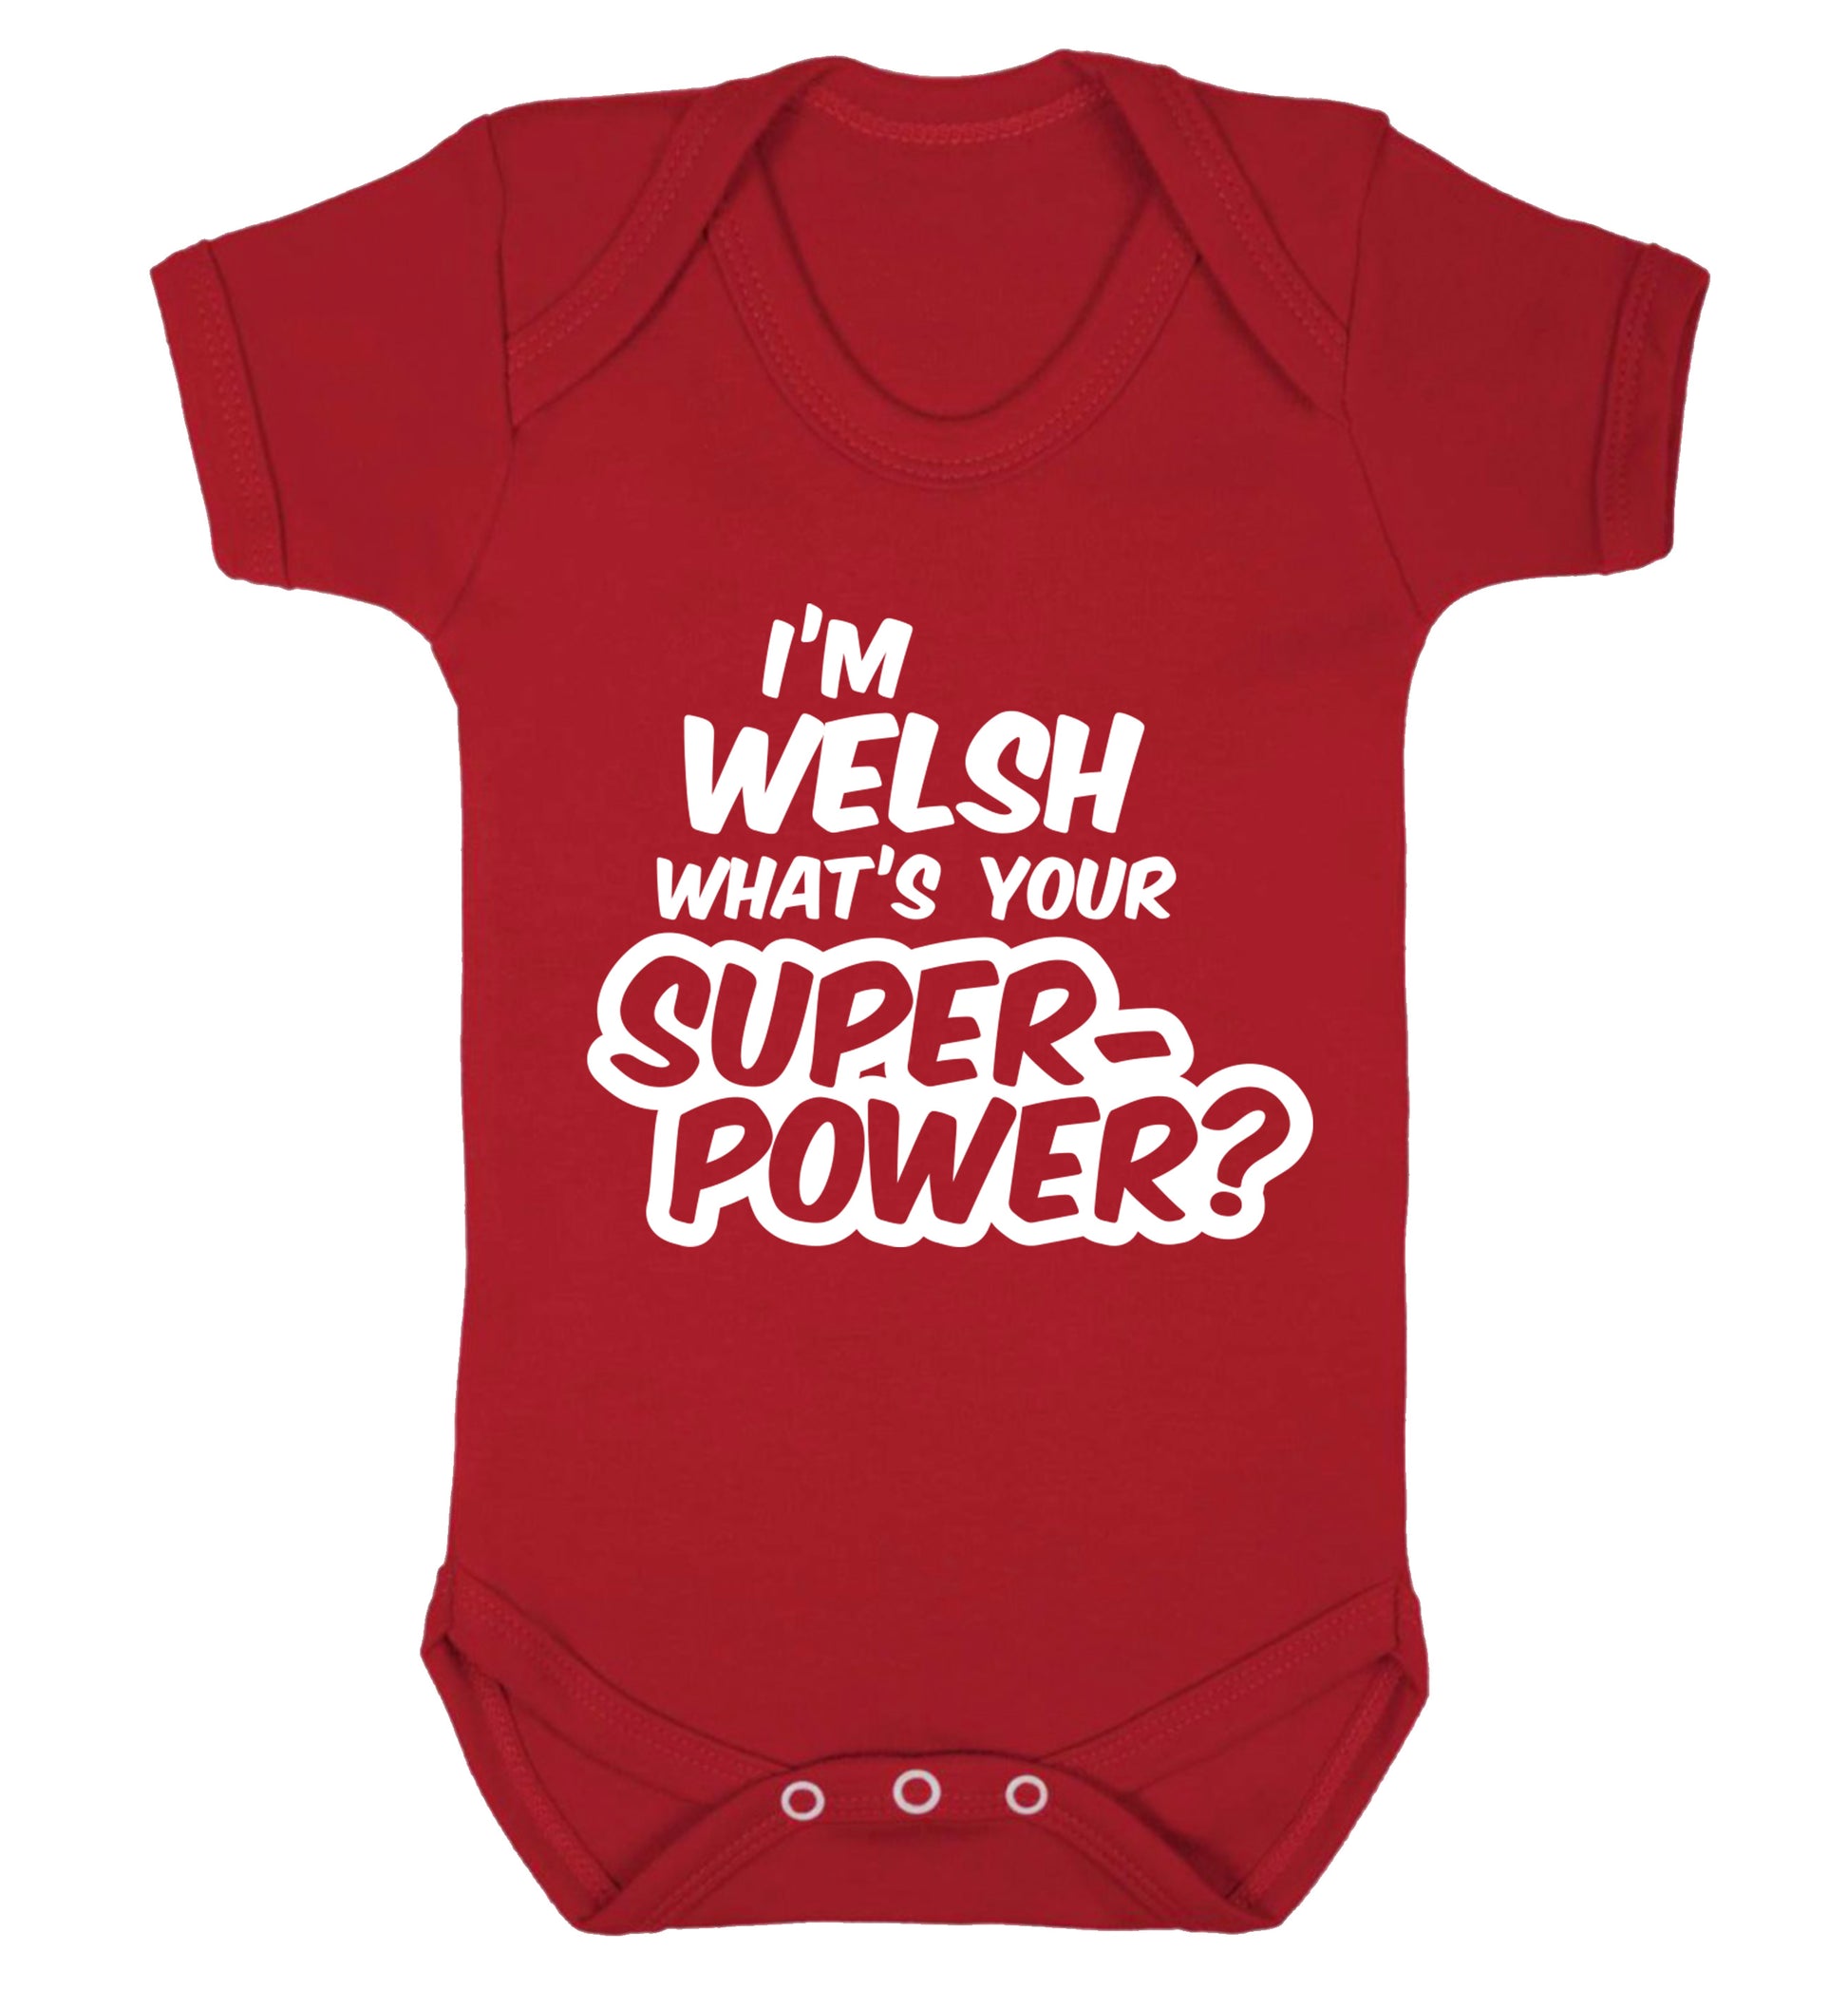 I'm Welsh what's your superpower? Baby Vest red 18-24 months